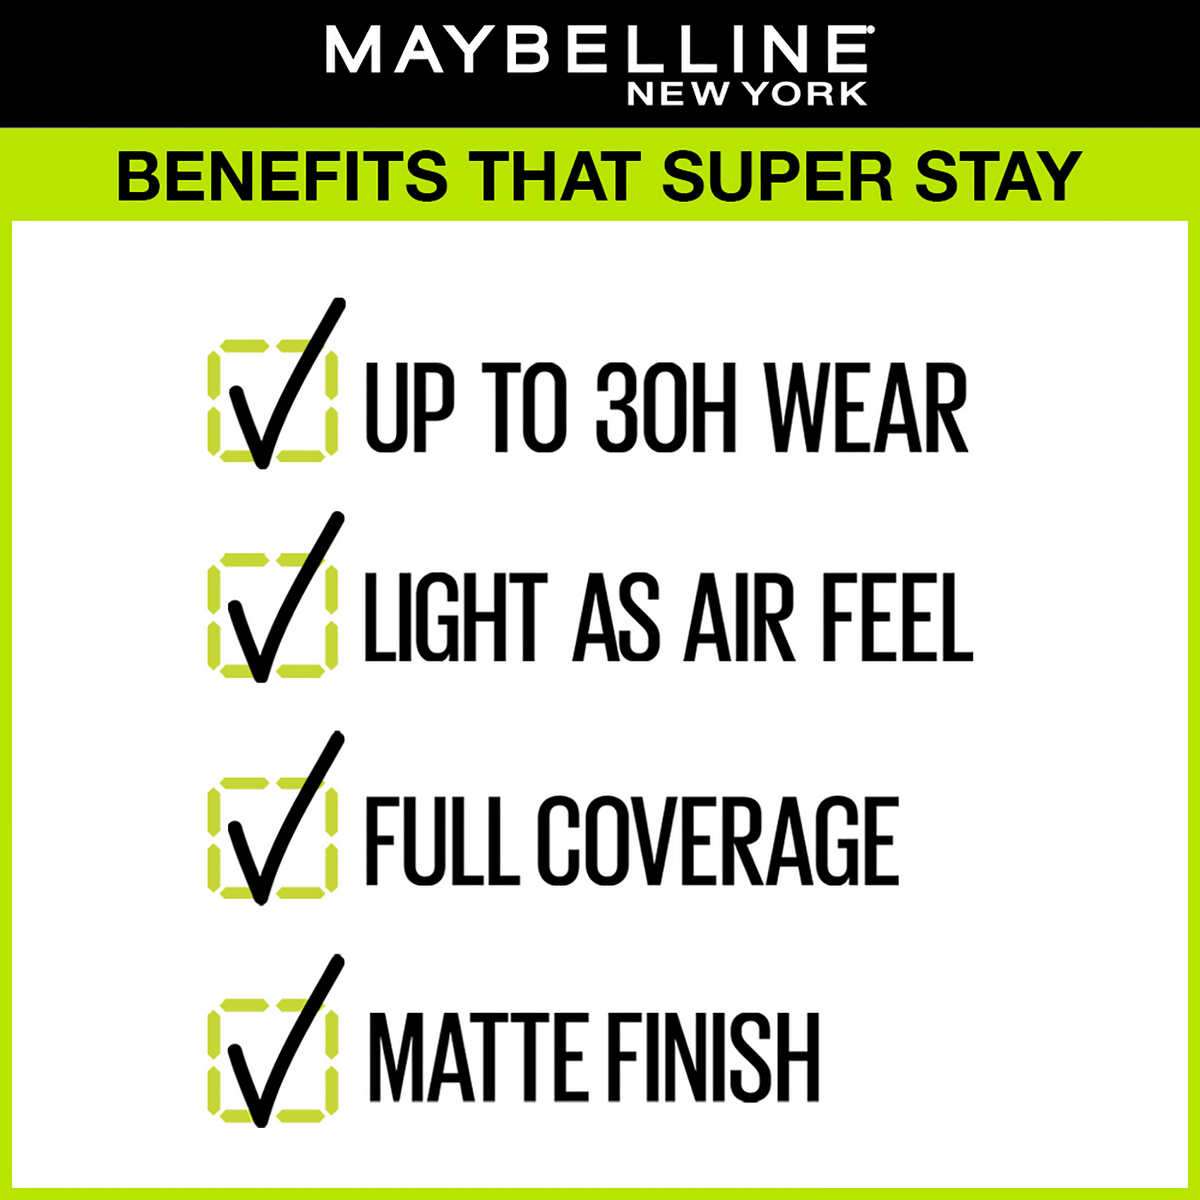 Buy Maybelline New York Online SSBeauty in Wear Price Coverage Liquid at SuperStay 30H Full Active Best Foundation India 